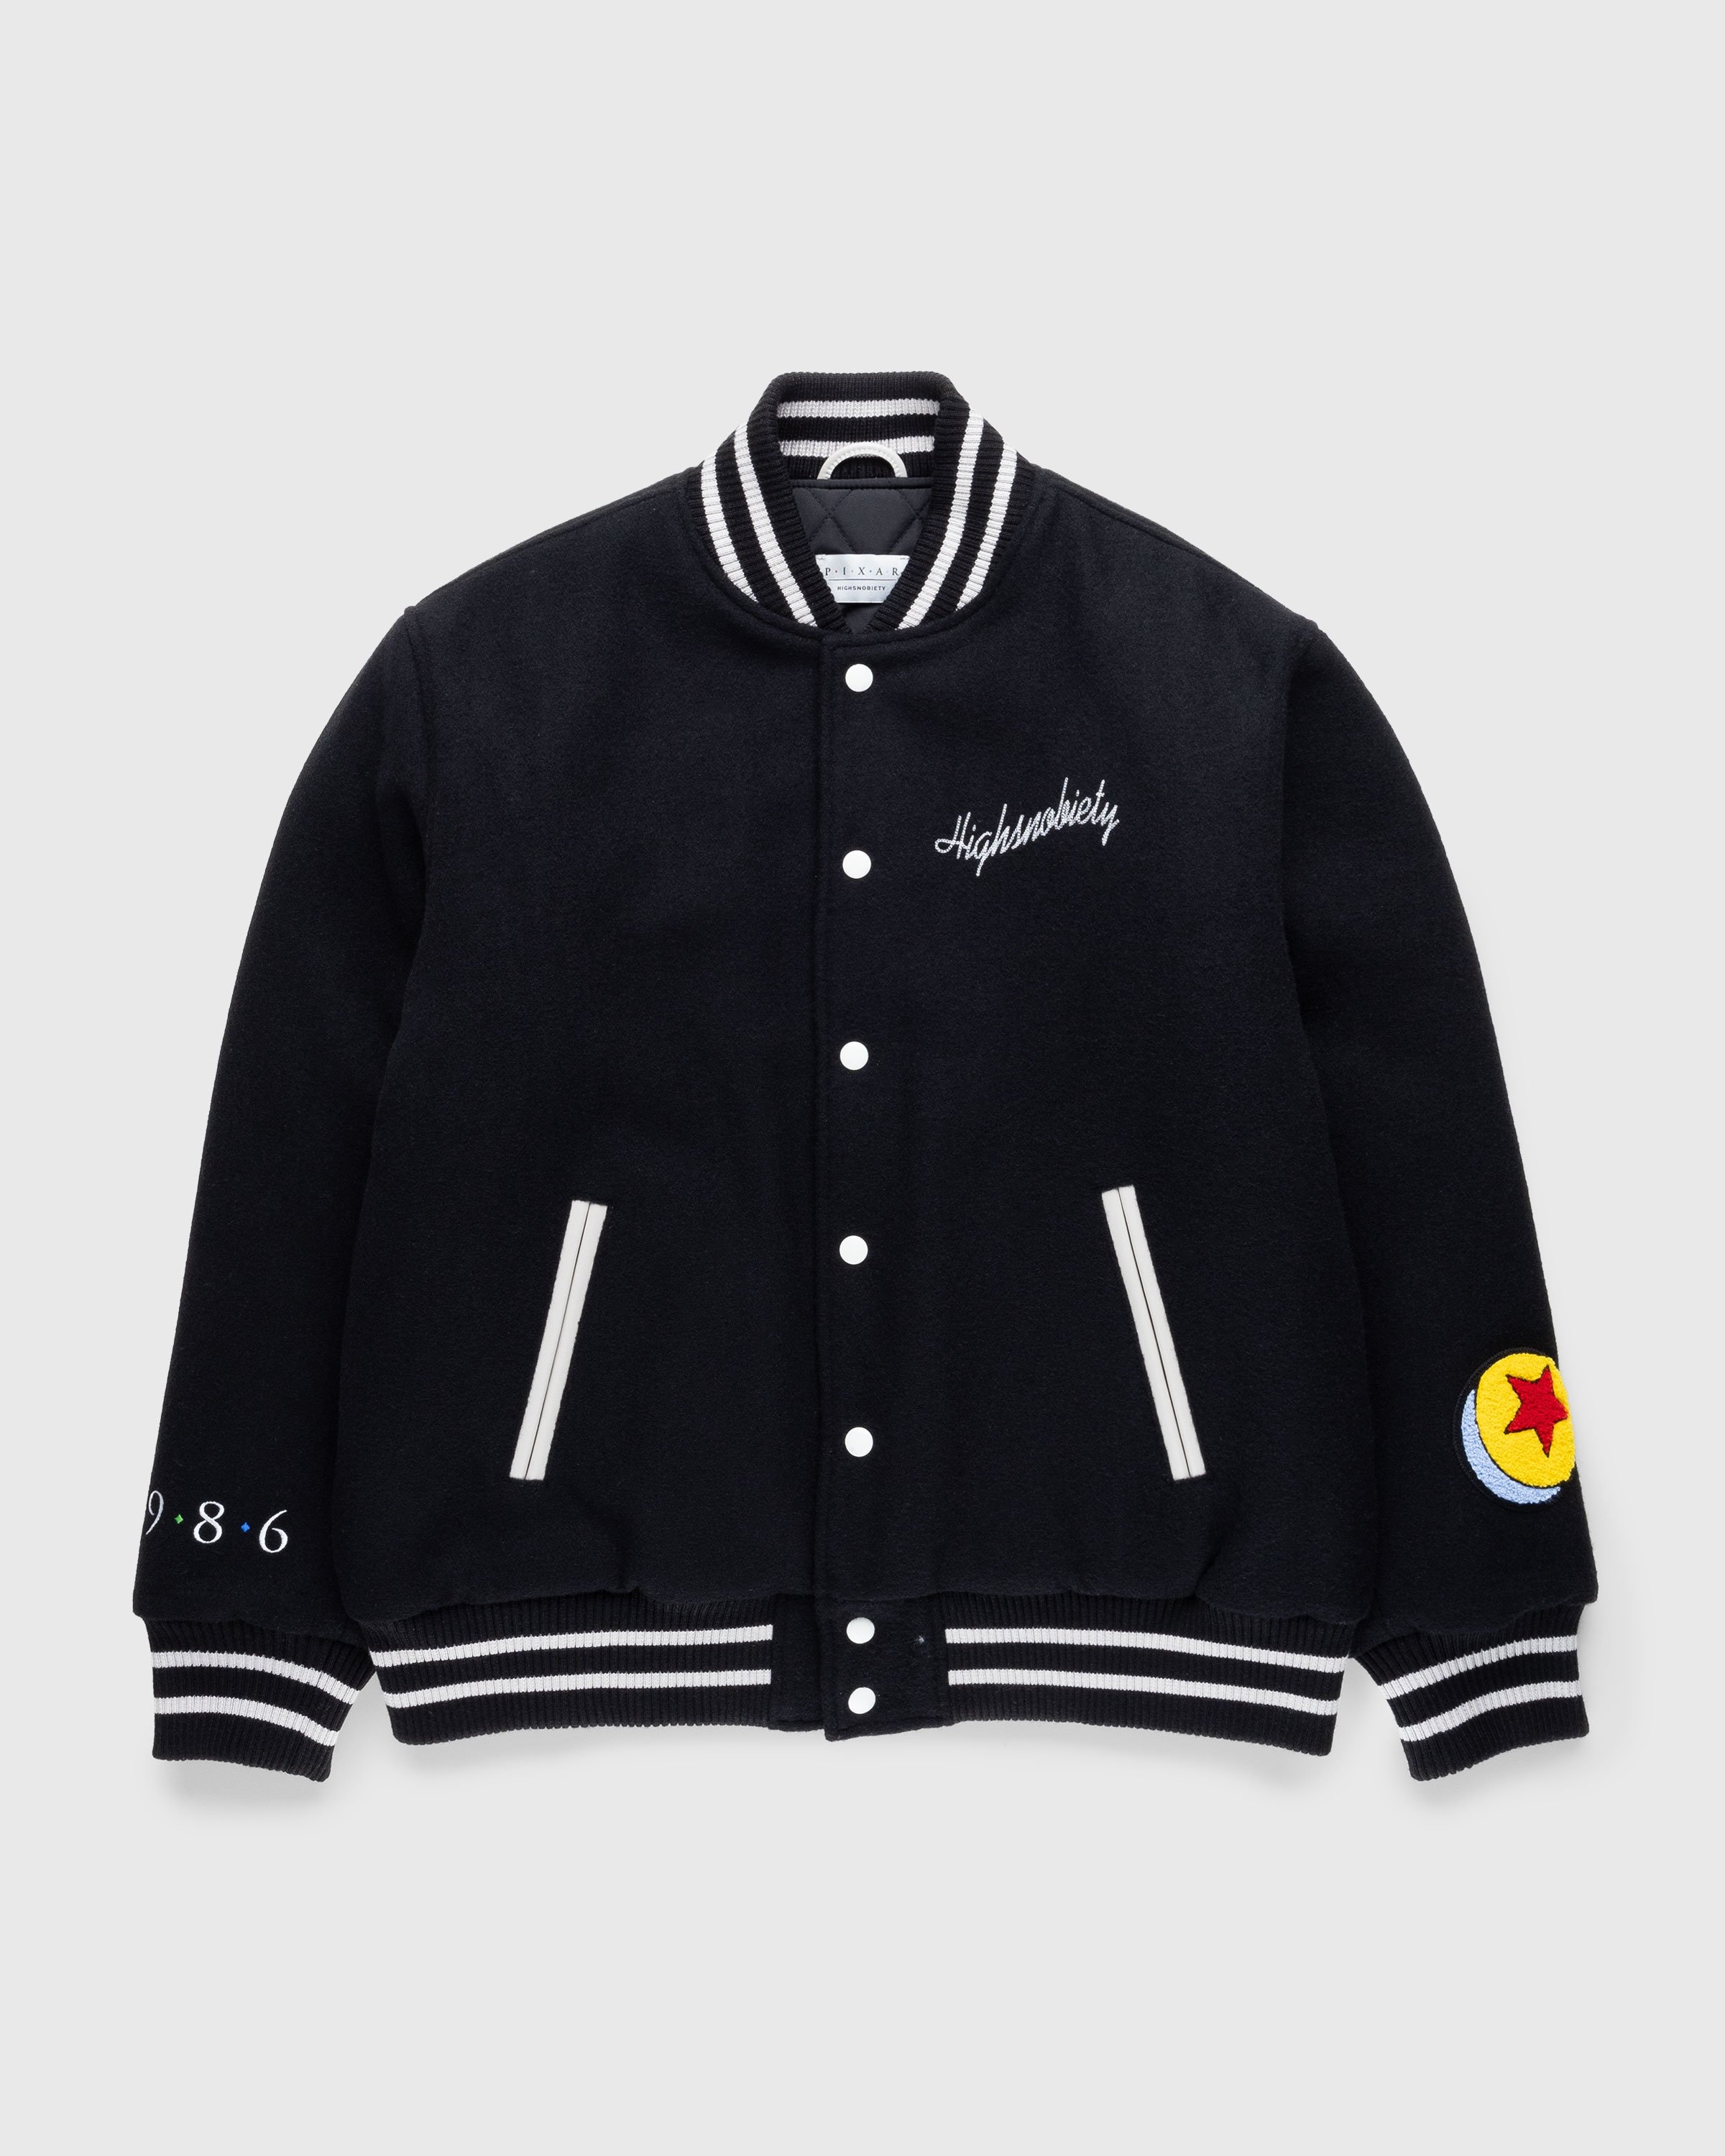 Home - JL Varisty Jackets and Patches